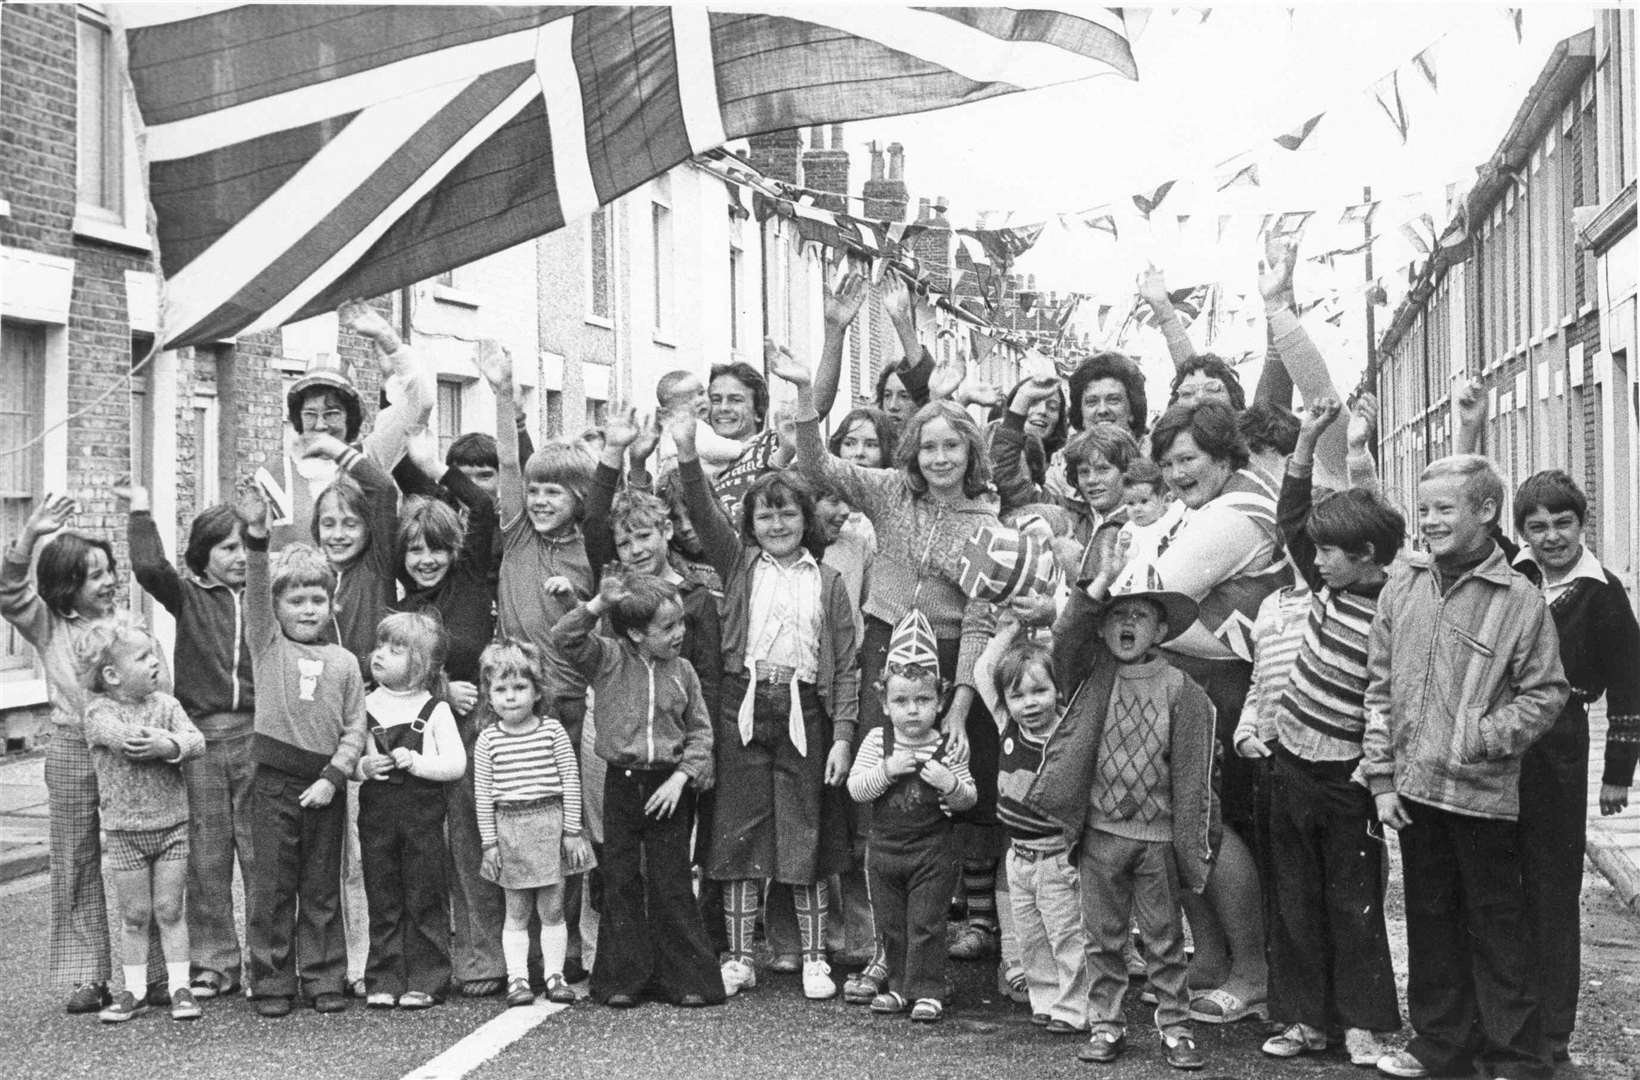 In June 1977, the children of Alma Street, Sheerness, celebrated the Queen's Silver Jubilee with a street party